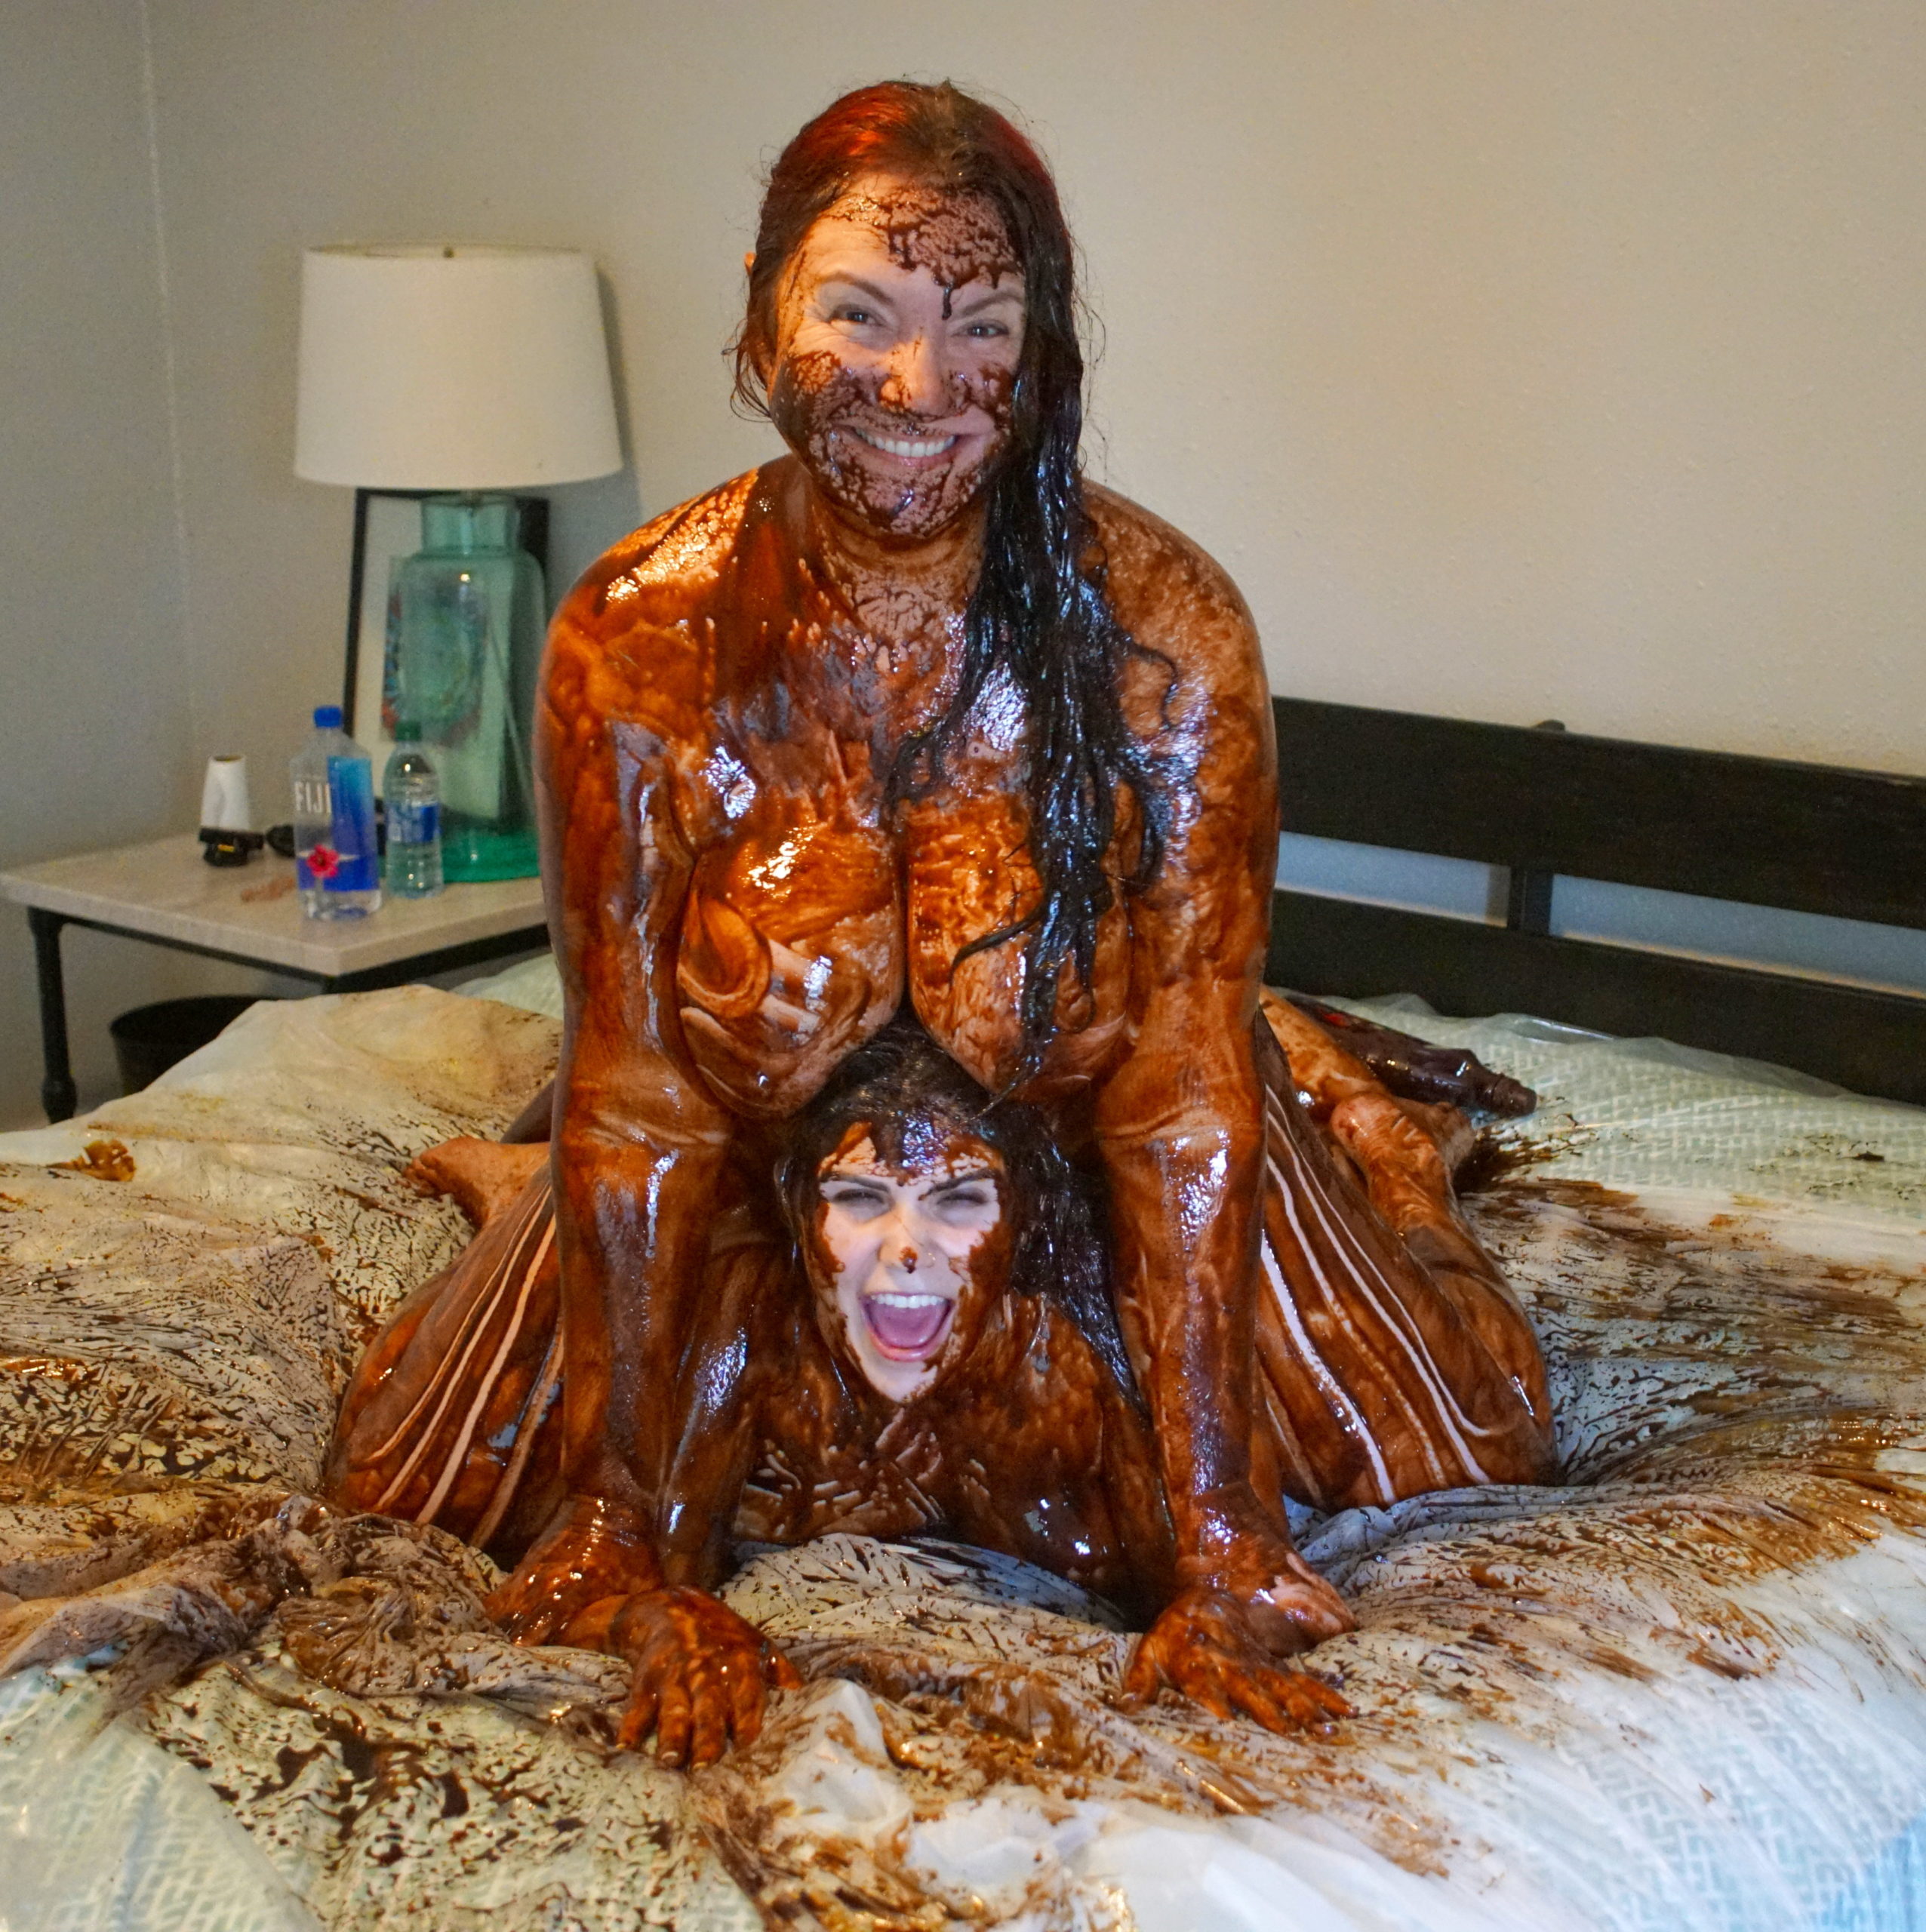 Cuddle Puddle, in chocolate!